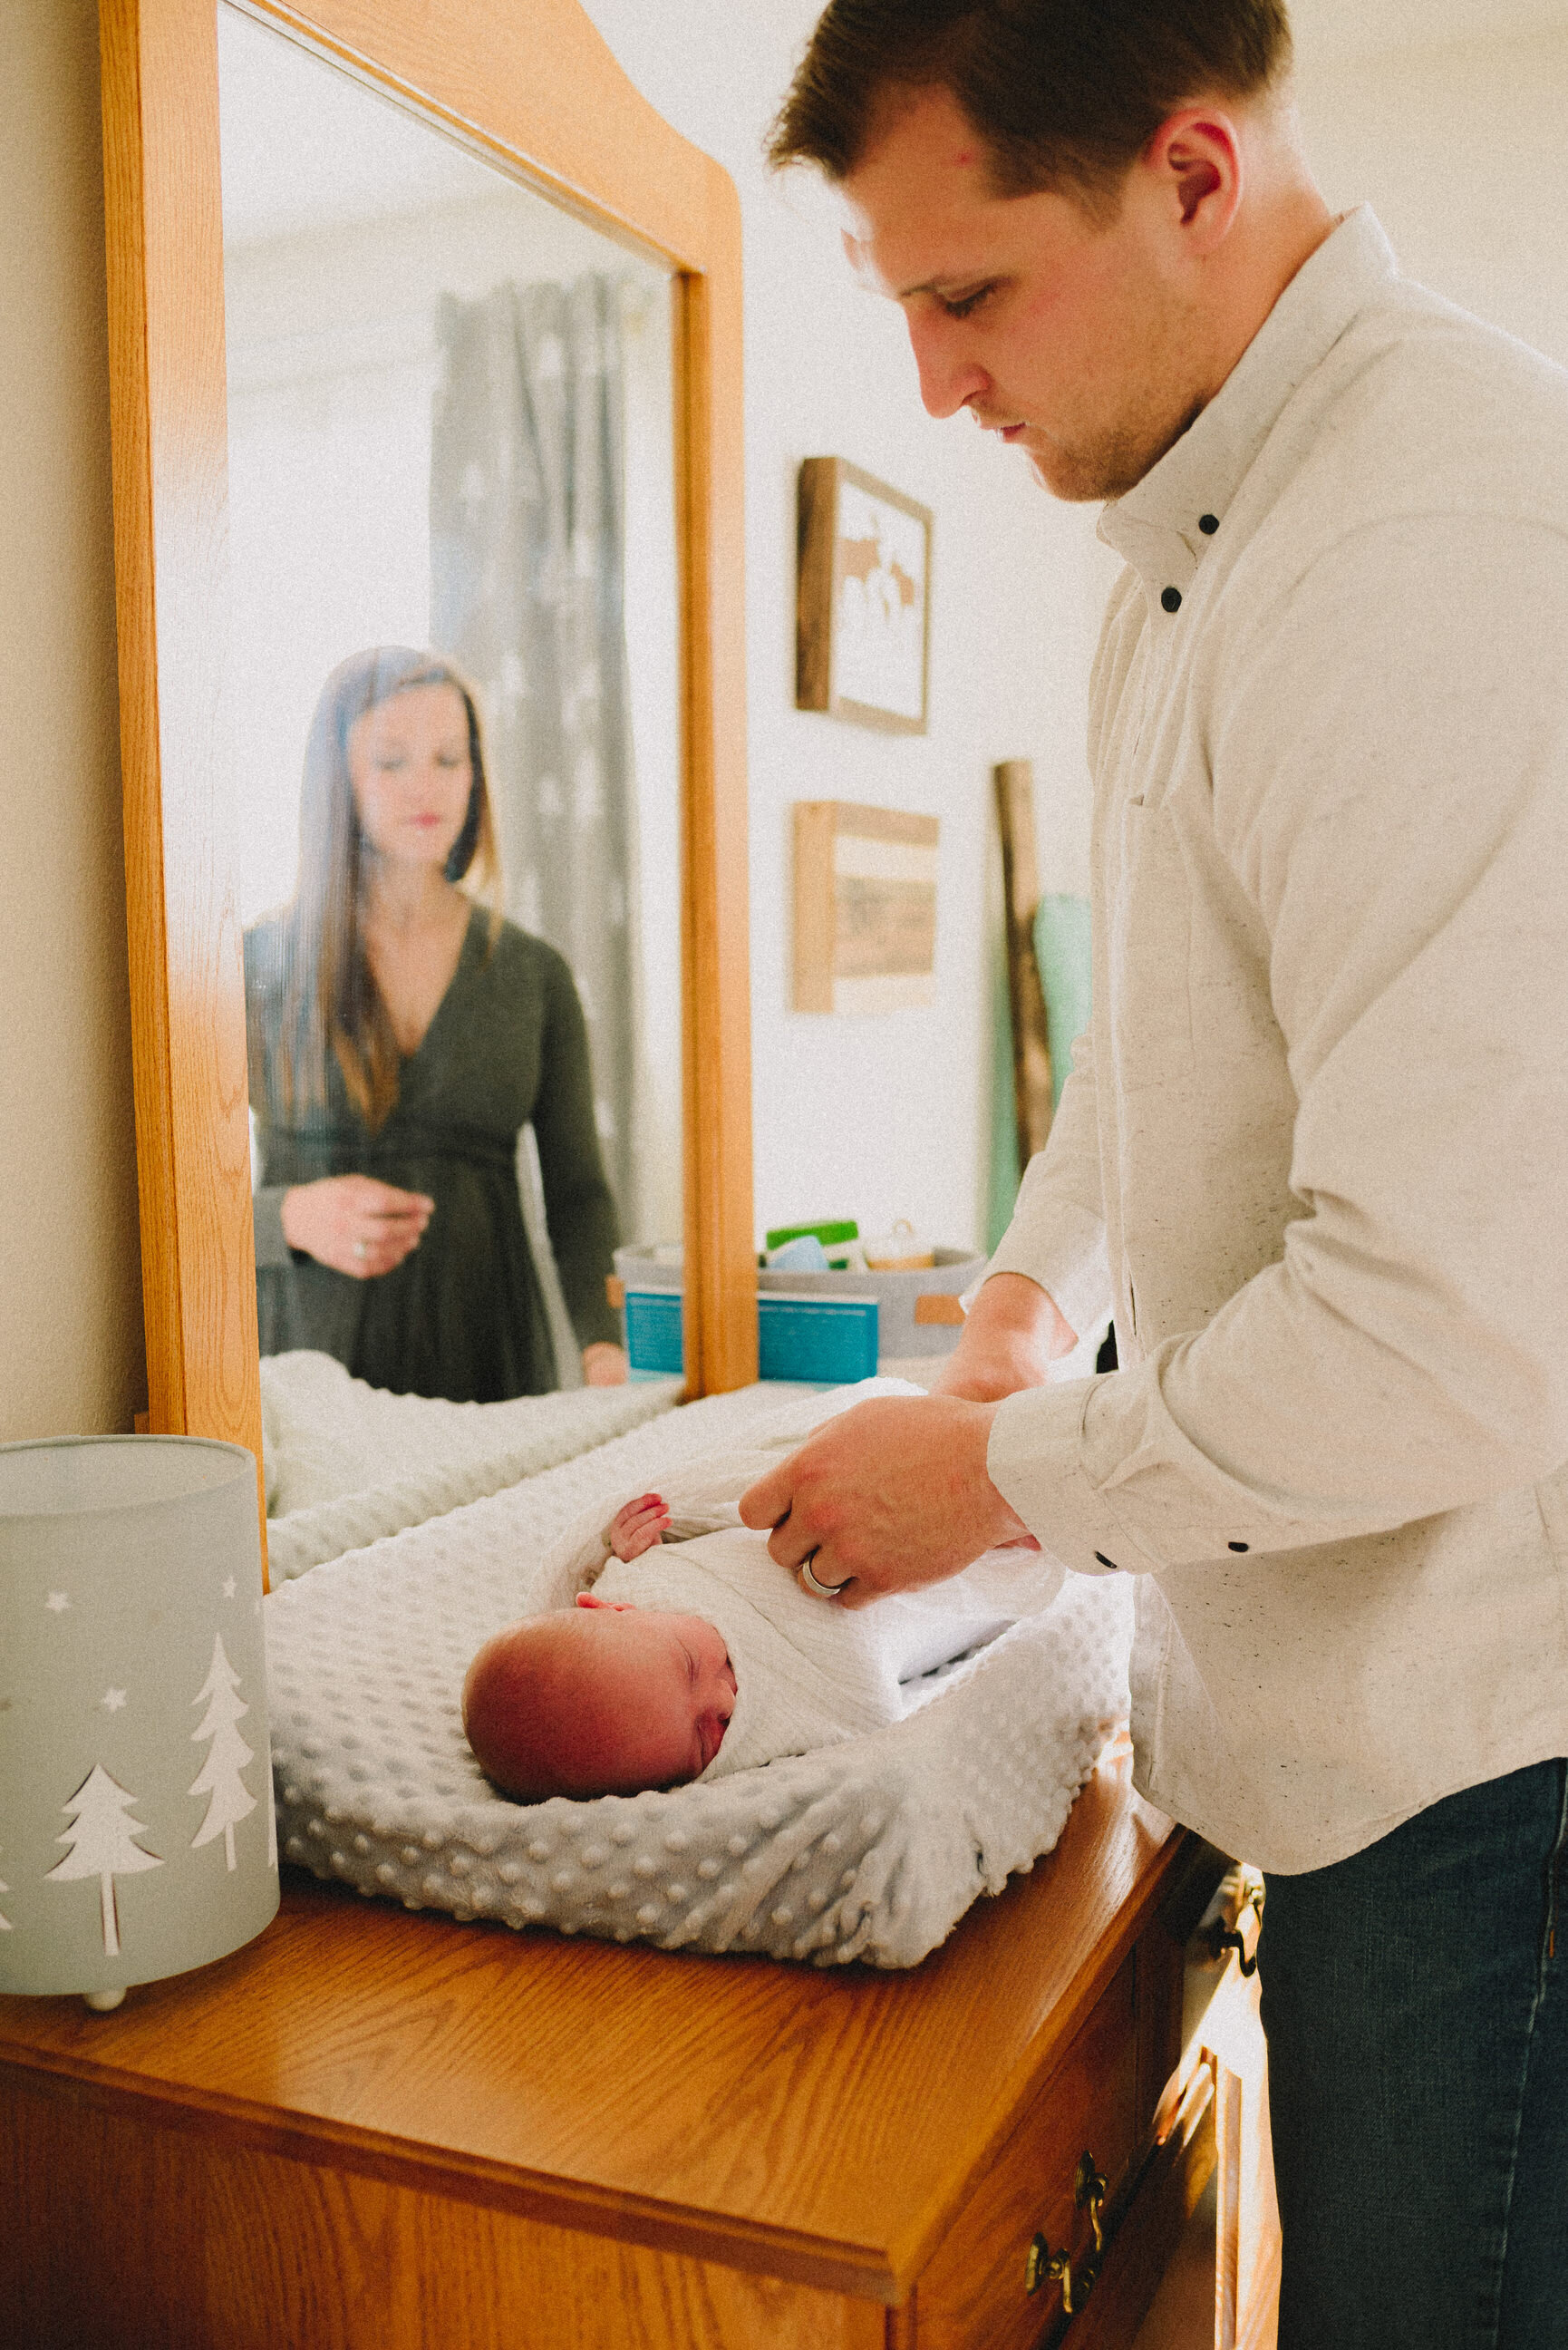 in-home-lifestyle-newborn-session-anchorage-alaska-photographer-way-up-north-photography (96).jpg